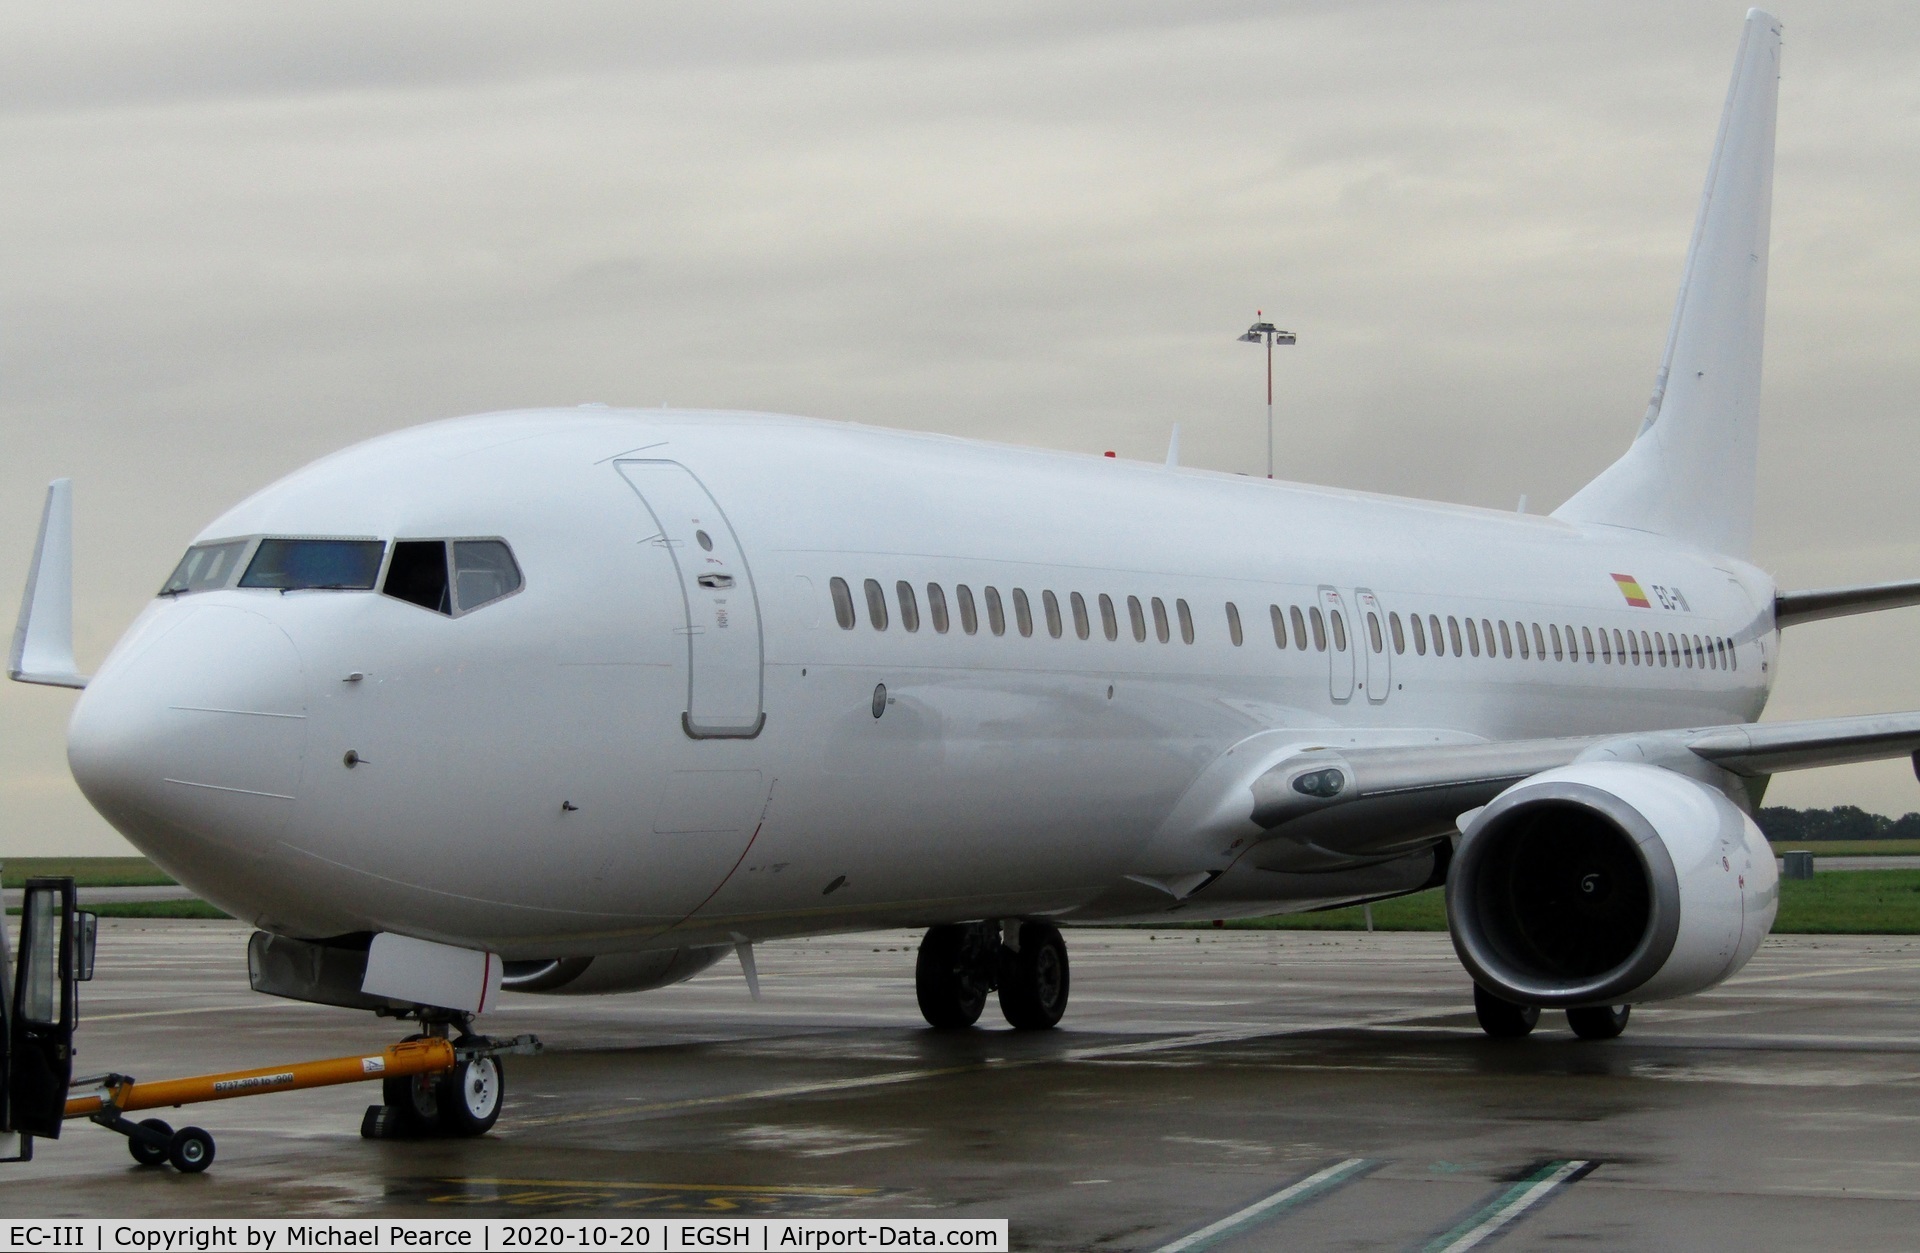 EC-III, 2002 Boeing 737-86Q C/N 30284, Ready for pushback from Stand 5, during maintenance.